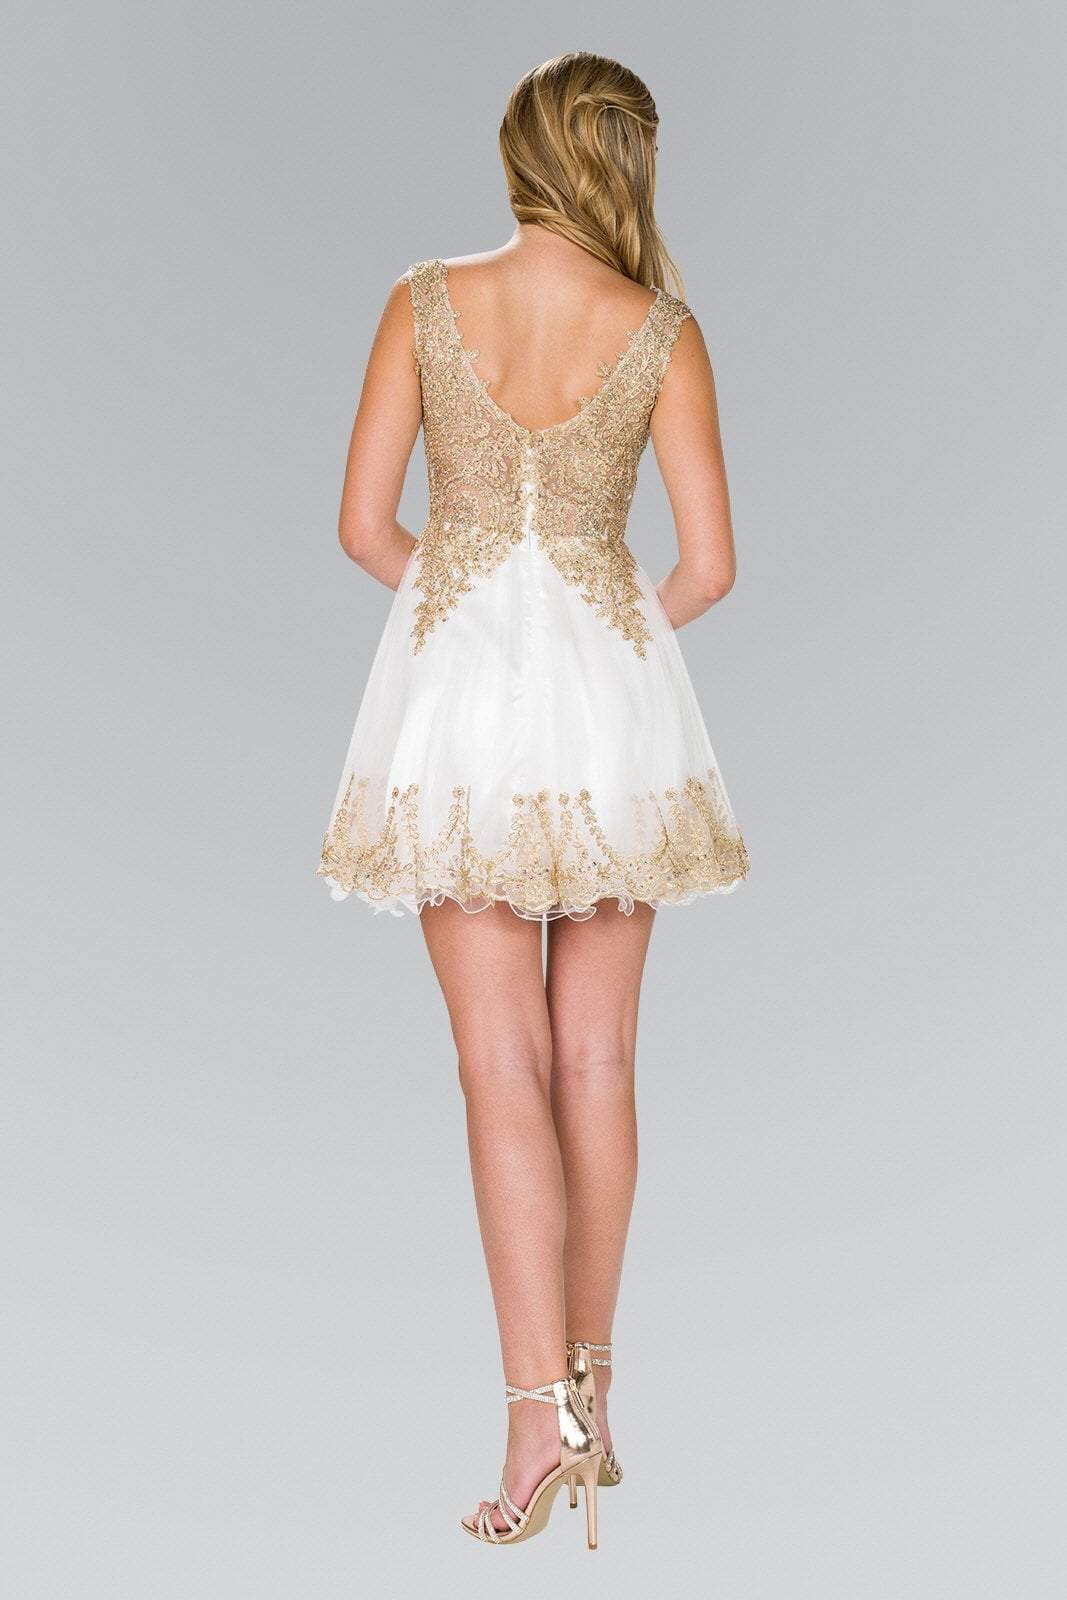 Grace Karin Sweetheart Gold Applique Gold Sequin Cocktail Dress Short White  Formal Prom Dress With Jurk Tulle Coctail HH374 From Werbowy, $93.12